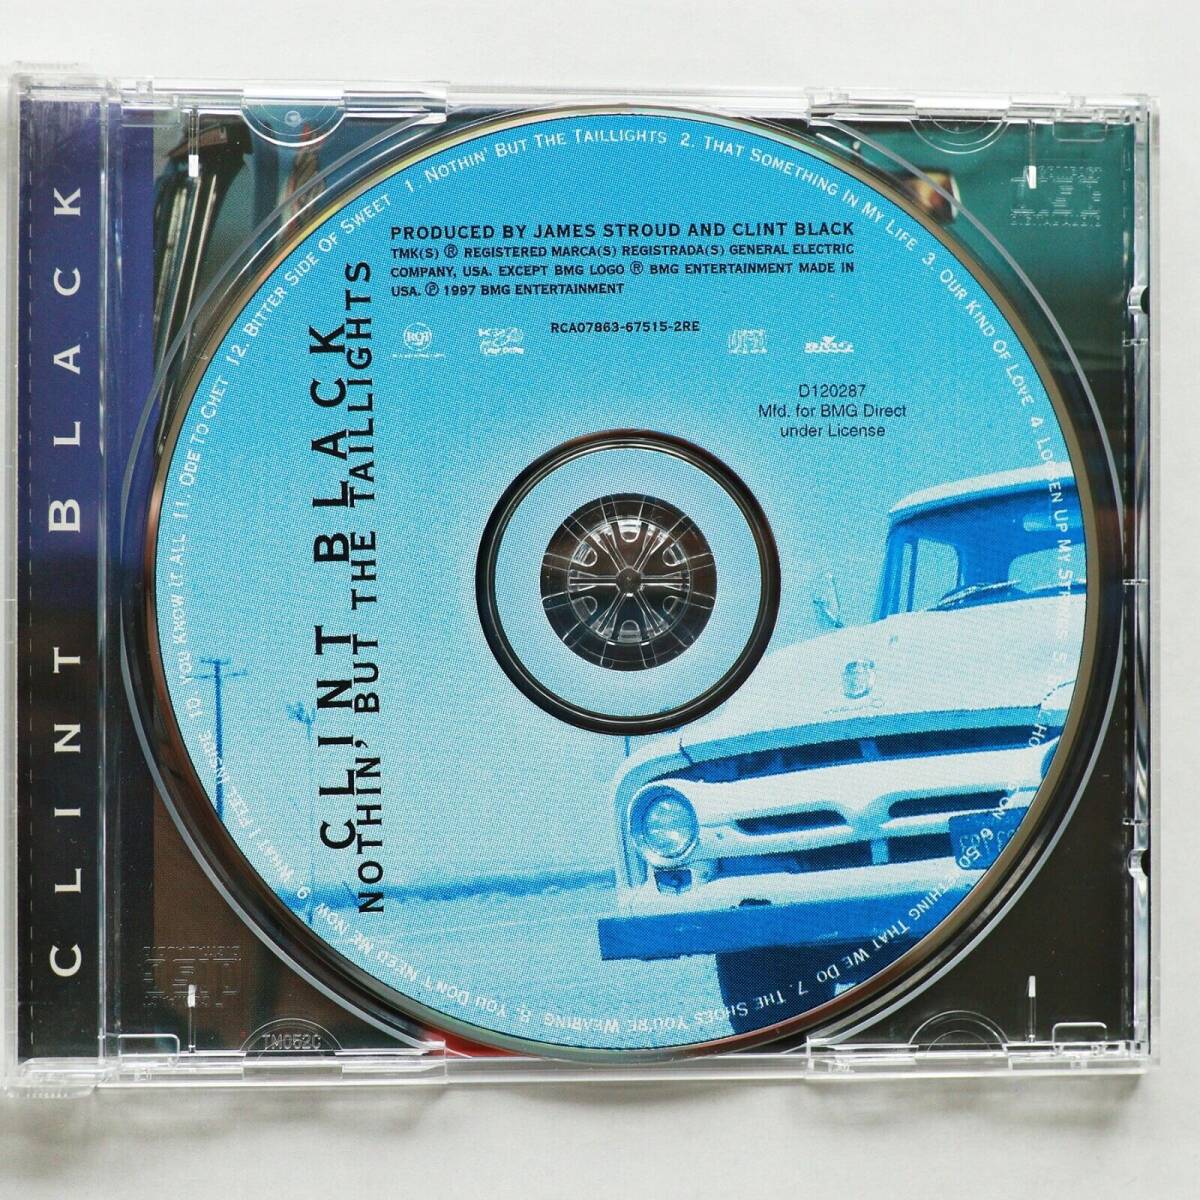 Clint Black - Nothin' But The Taillights (CD, 1997) BMG Entertainment 海外 即決_Clint Black - Noth 4